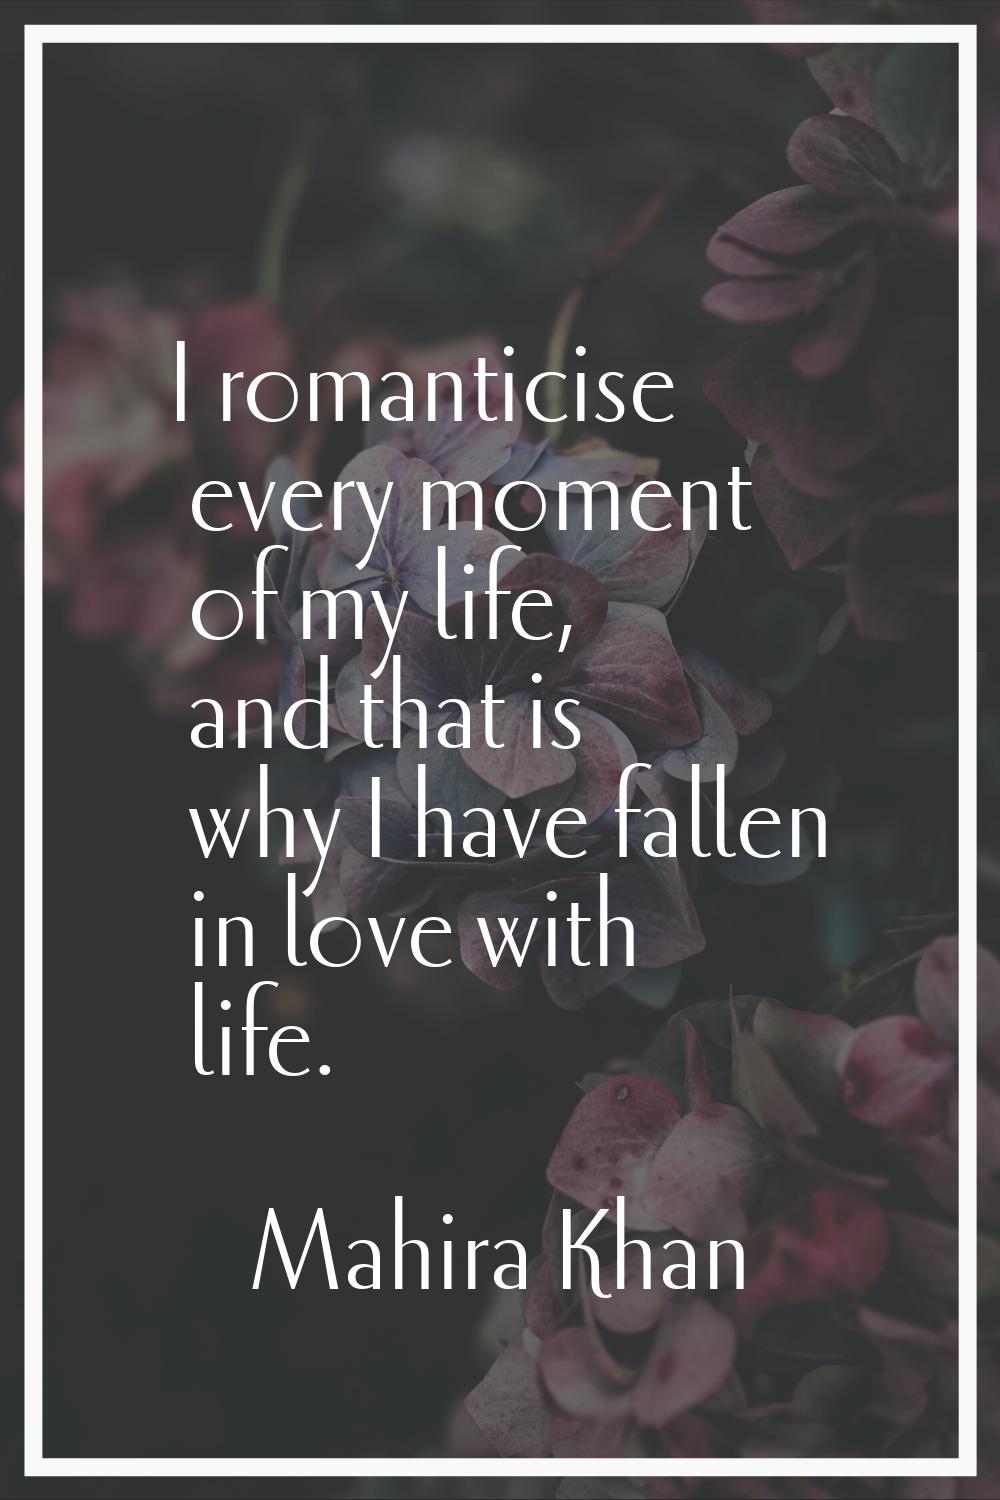 I romanticise every moment of my life, and that is why I have fallen in love with life.